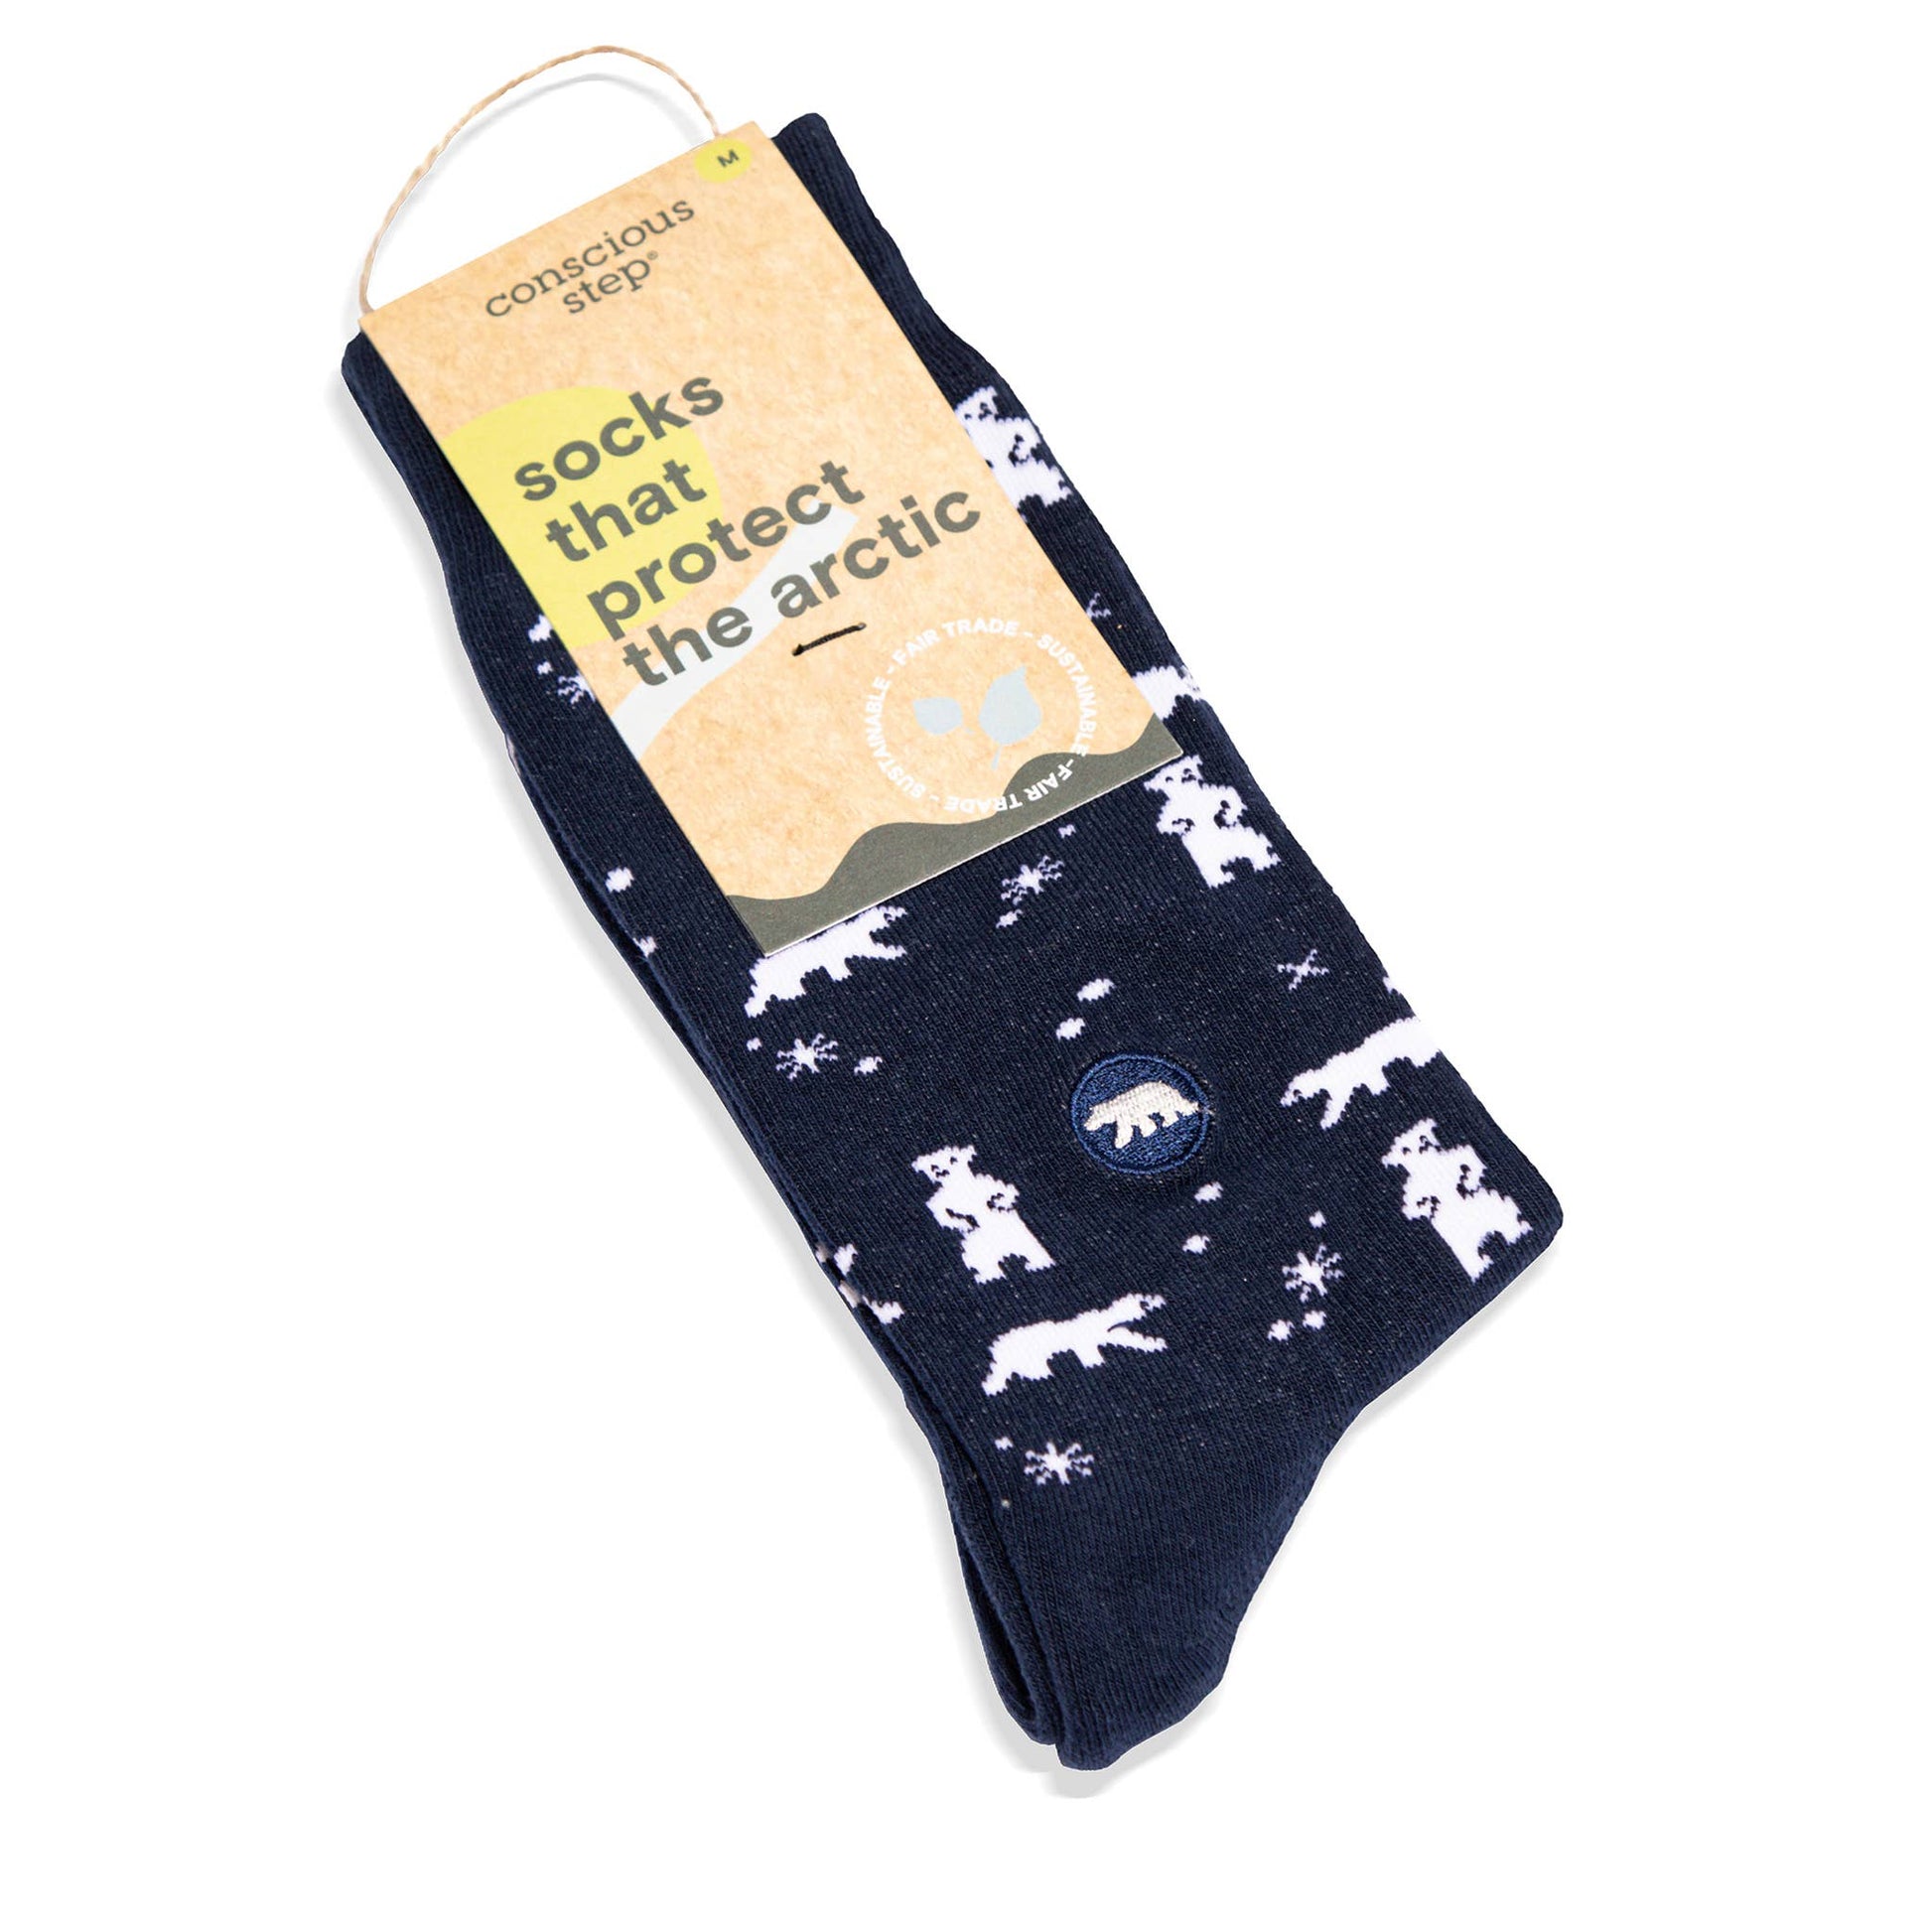 Socks that Protect Polar Bears: Small Accessories Conscious Step   